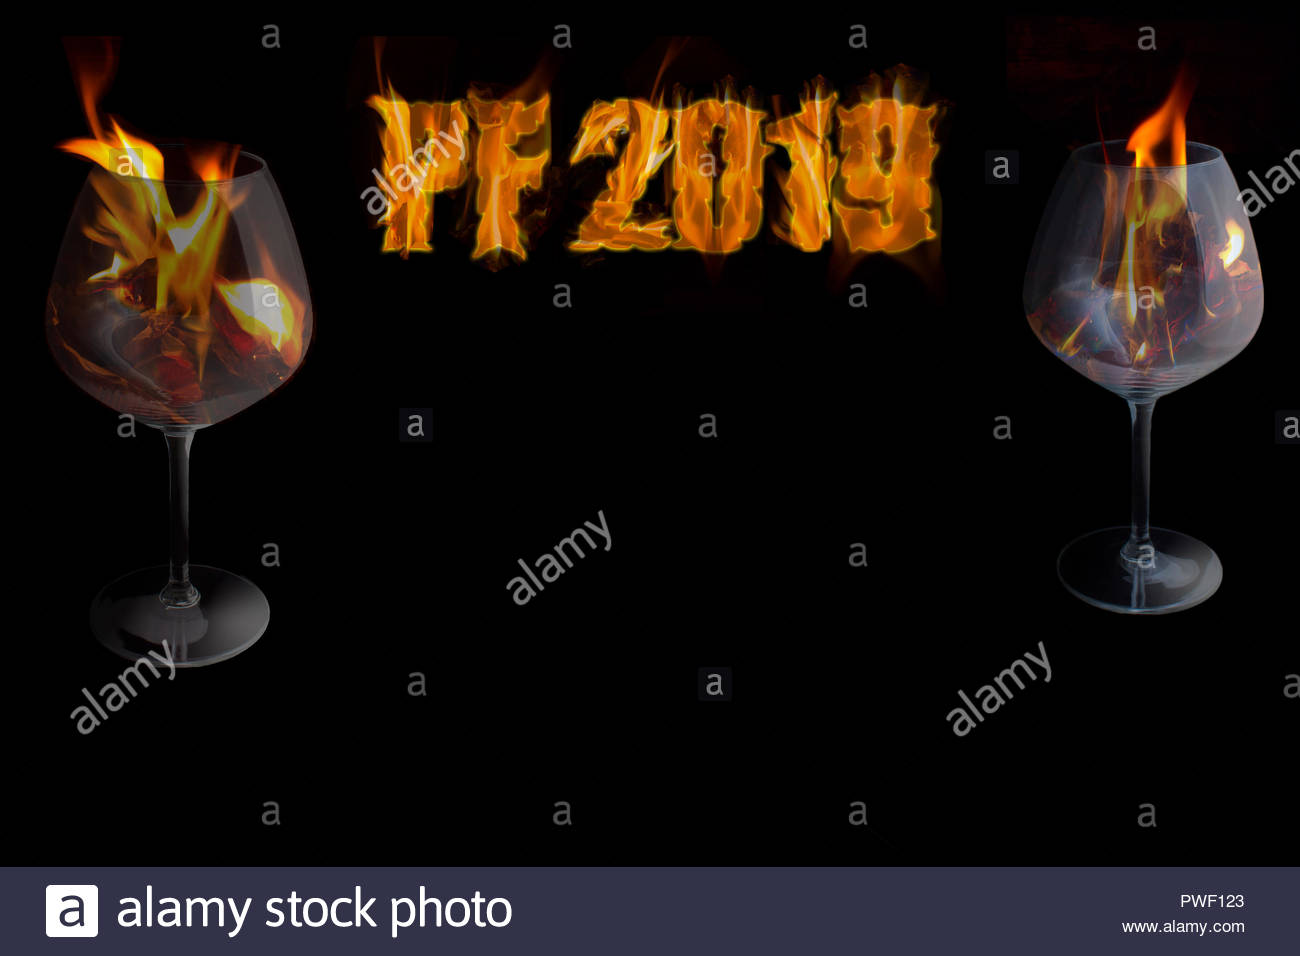 Pf Happy New Year With Two Glasses In A Fire On Black